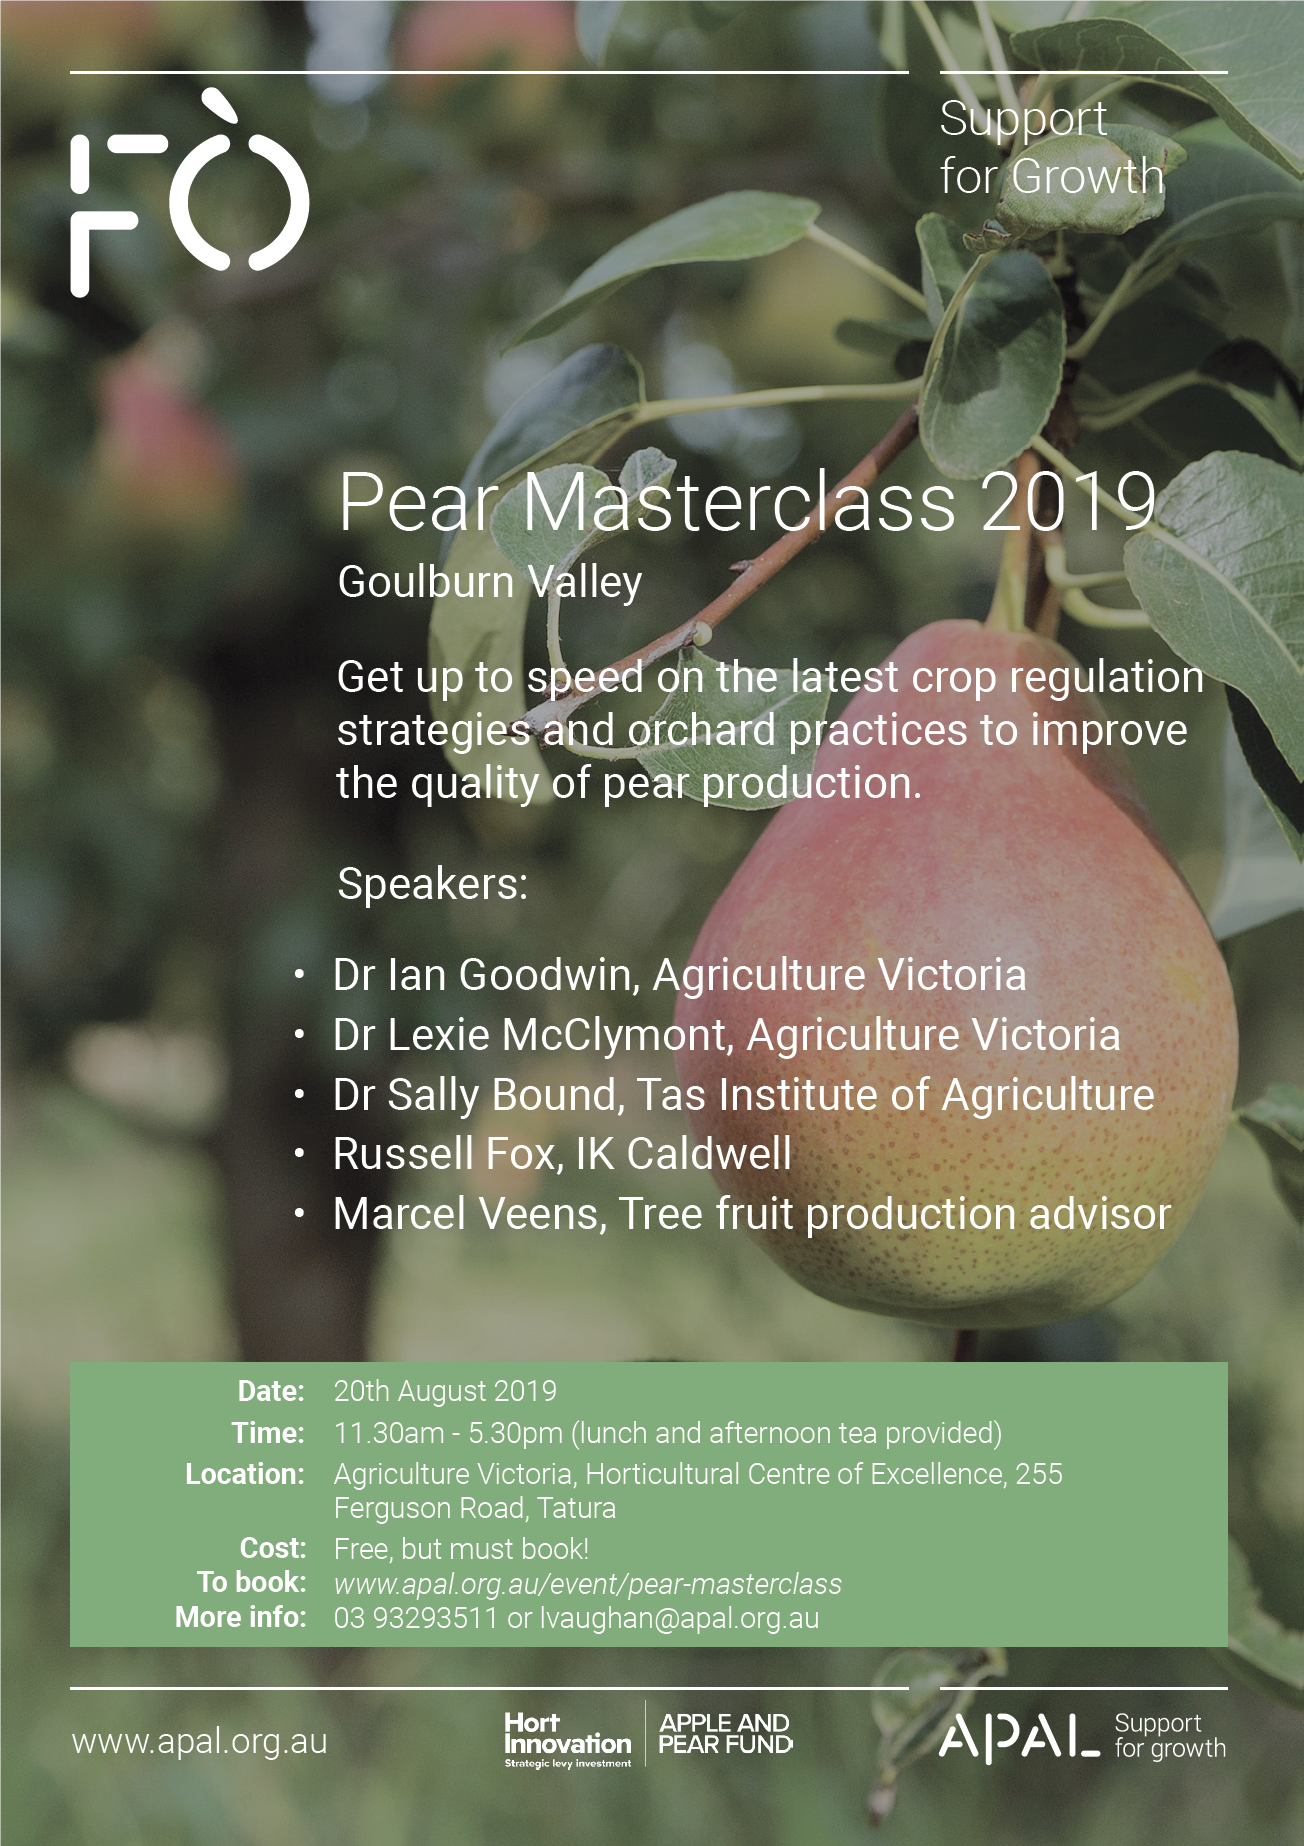 Annual Future Orchards Pear Masterclass- 20th August 2019 at 11:30am